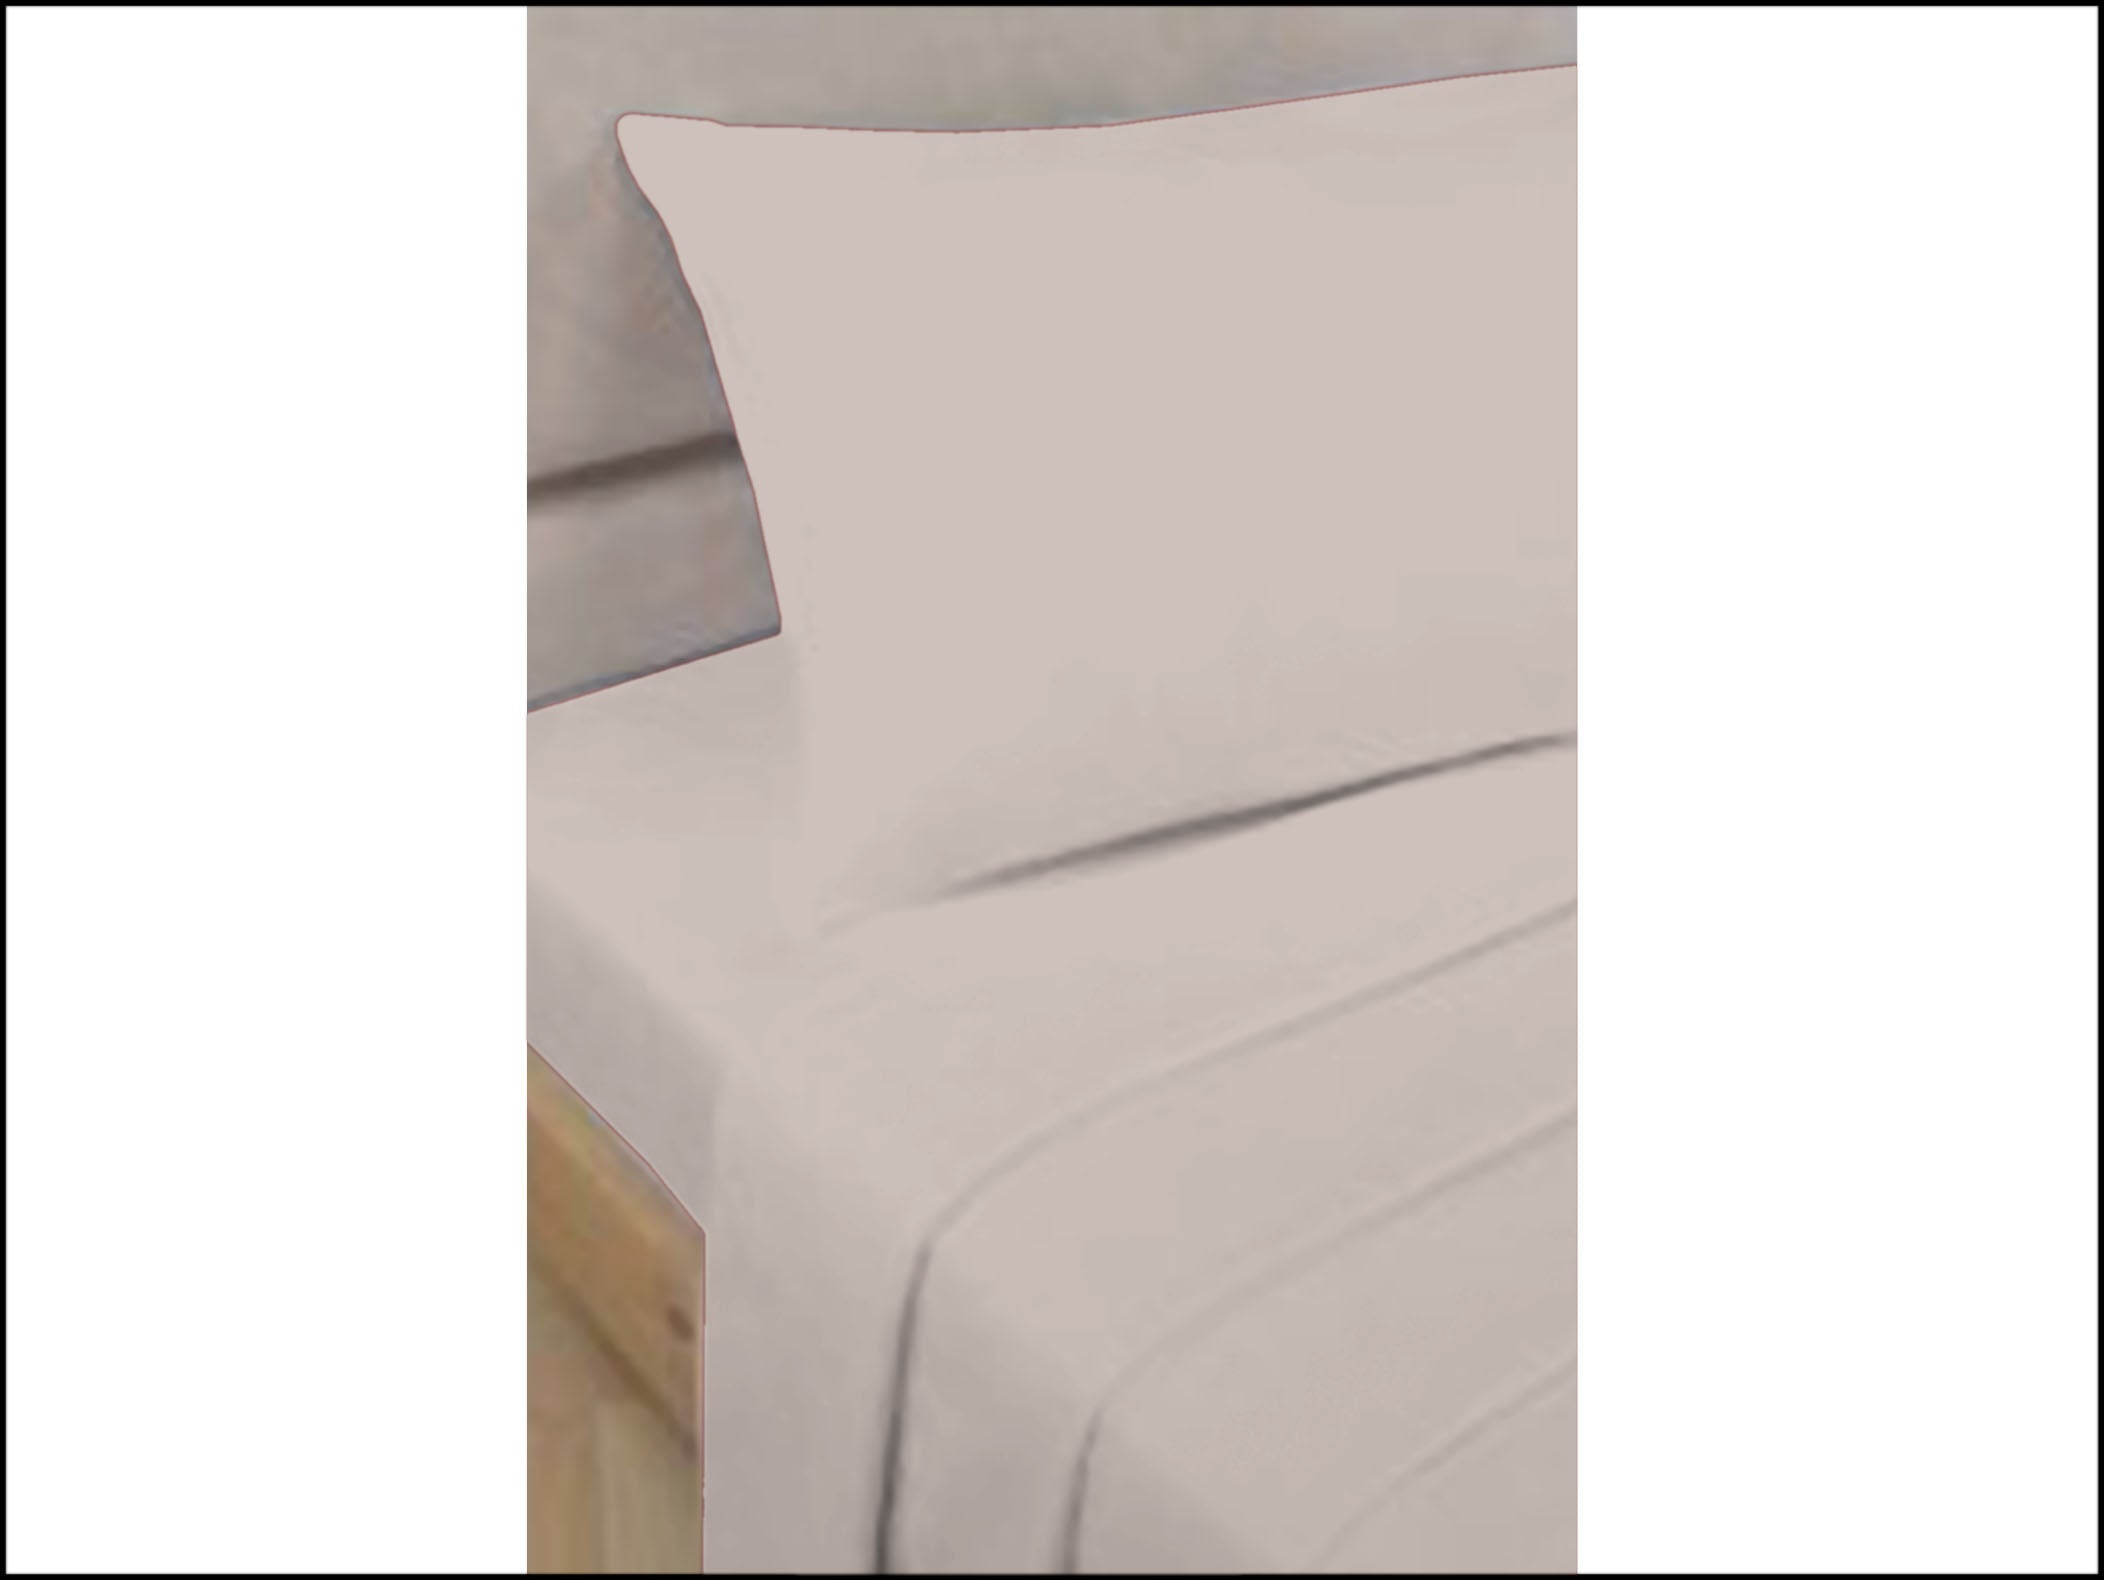 Lewis’s Easy Care Plain Dyed Bedding Sheet Range - Silver - Housewife Pillowcases  | TJ Hughes